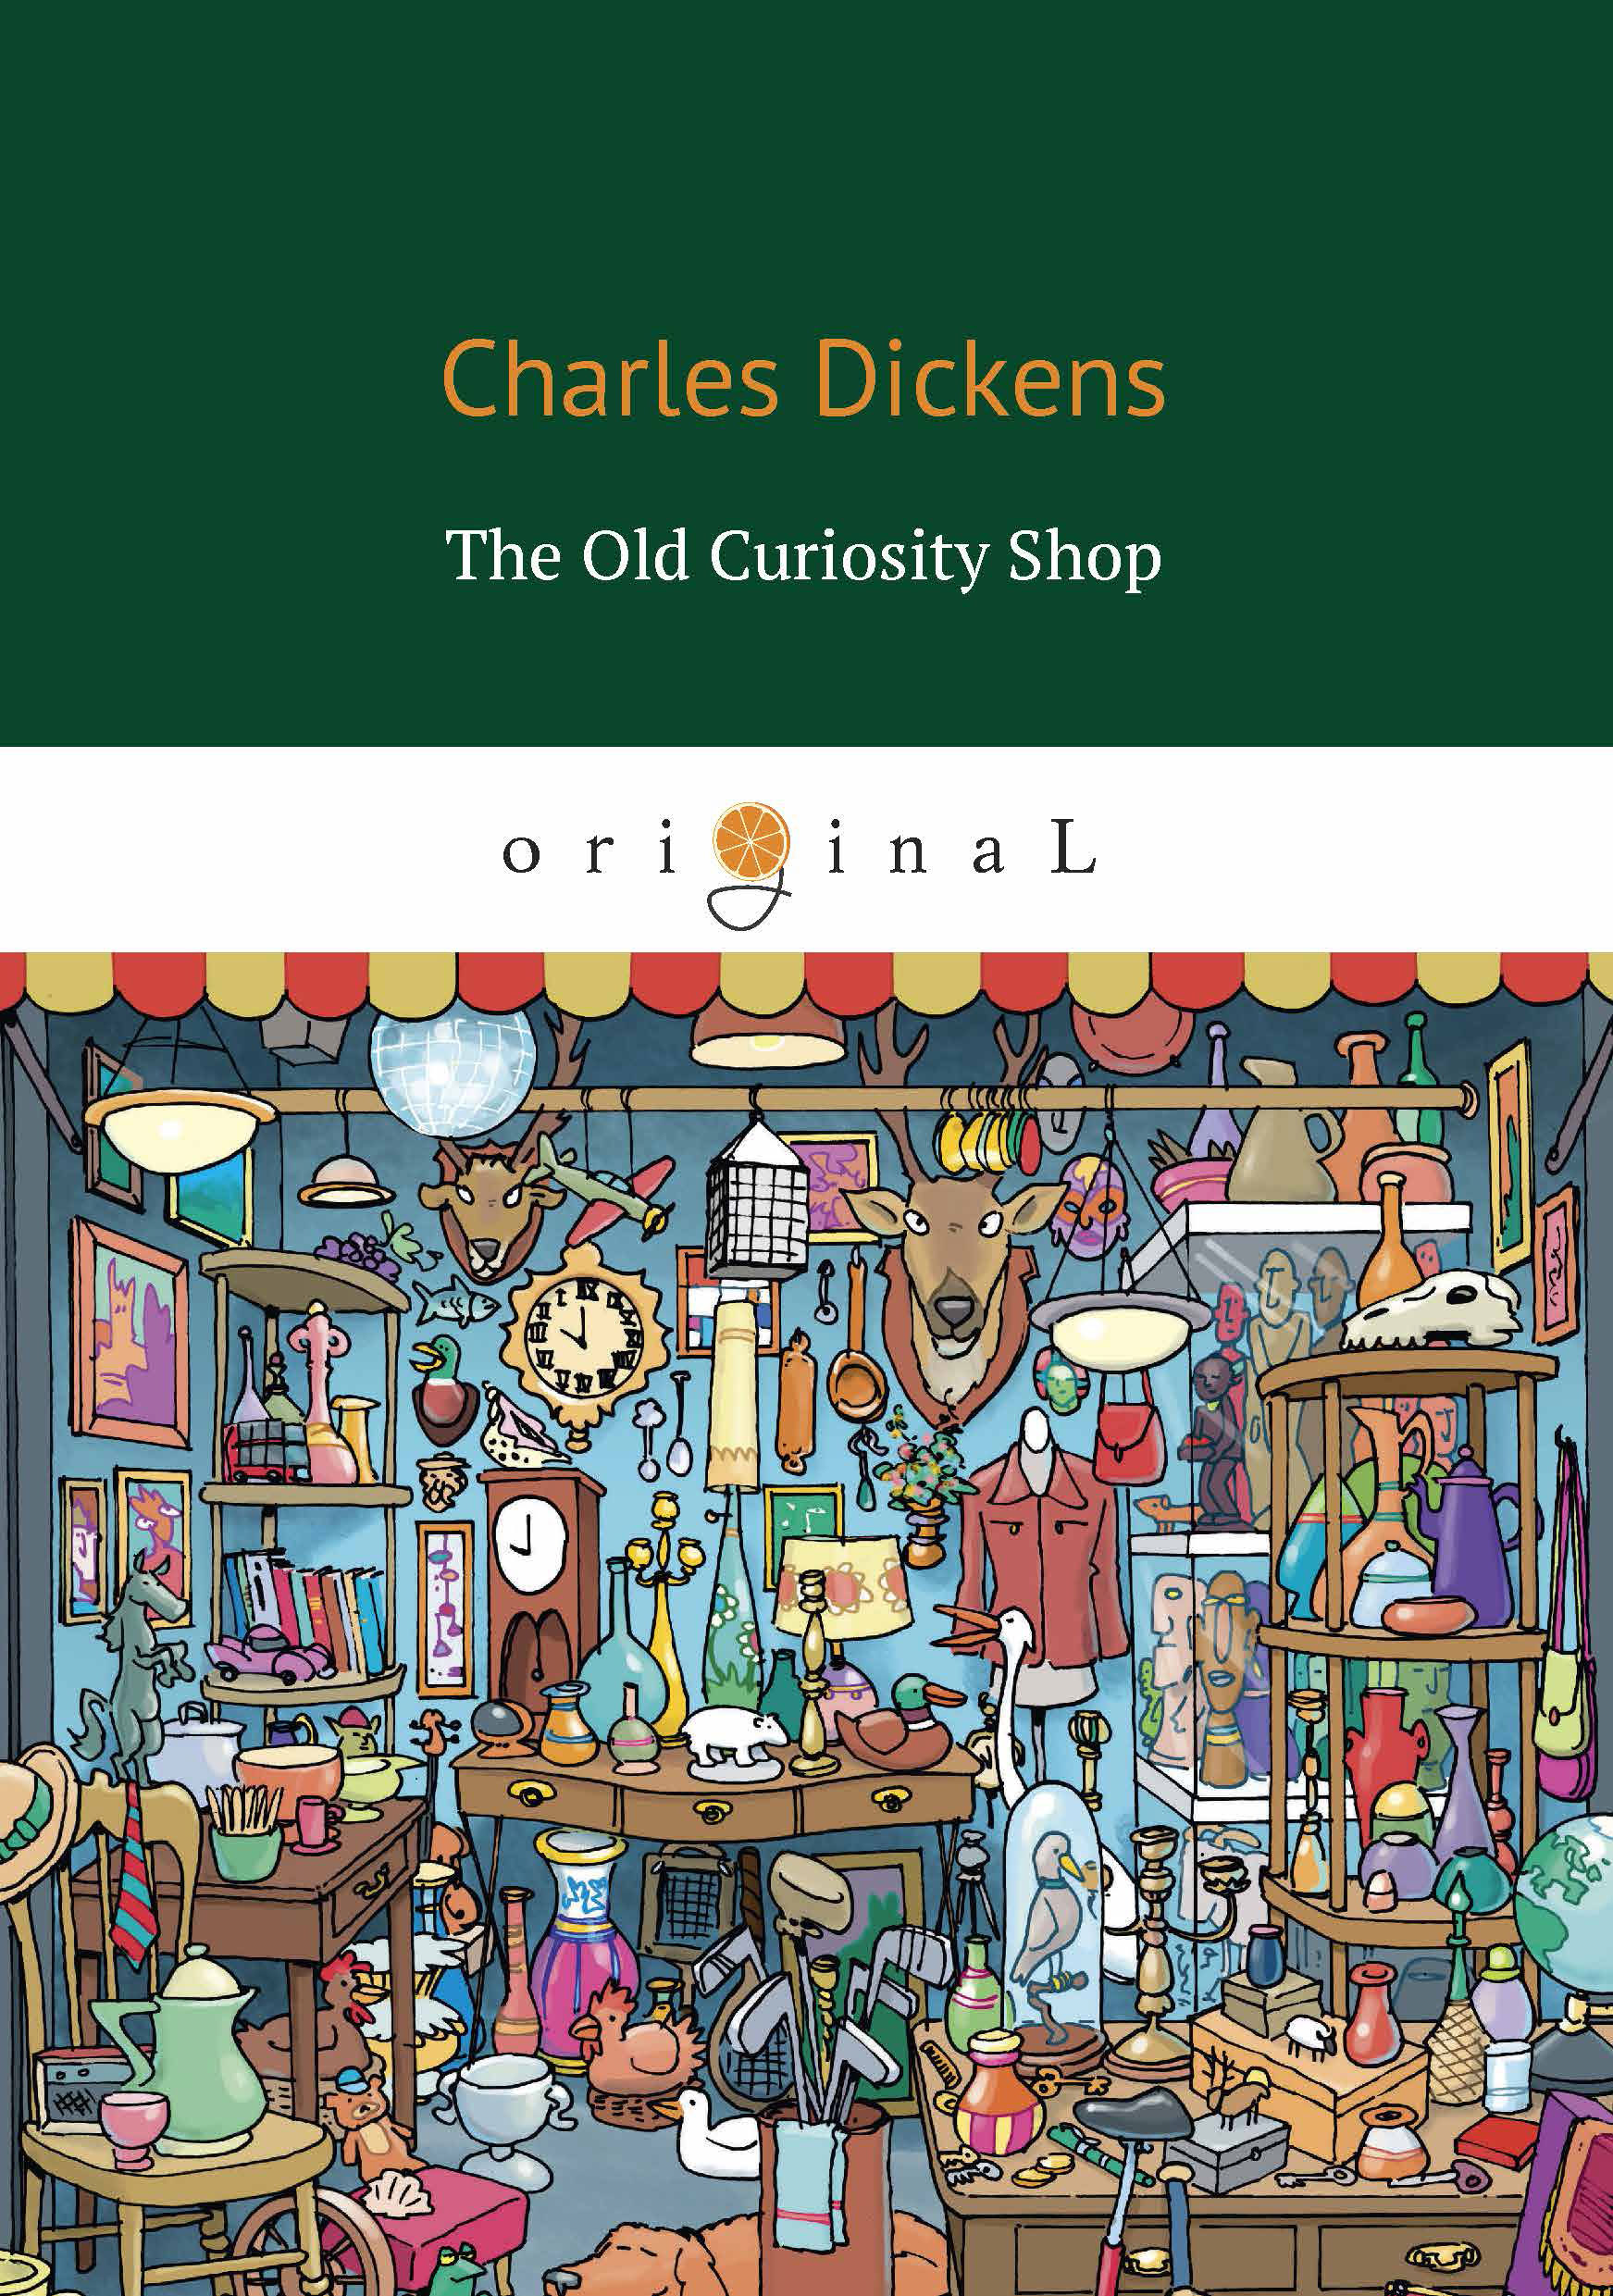 The Old Curiosity Shop. Charles Dickens